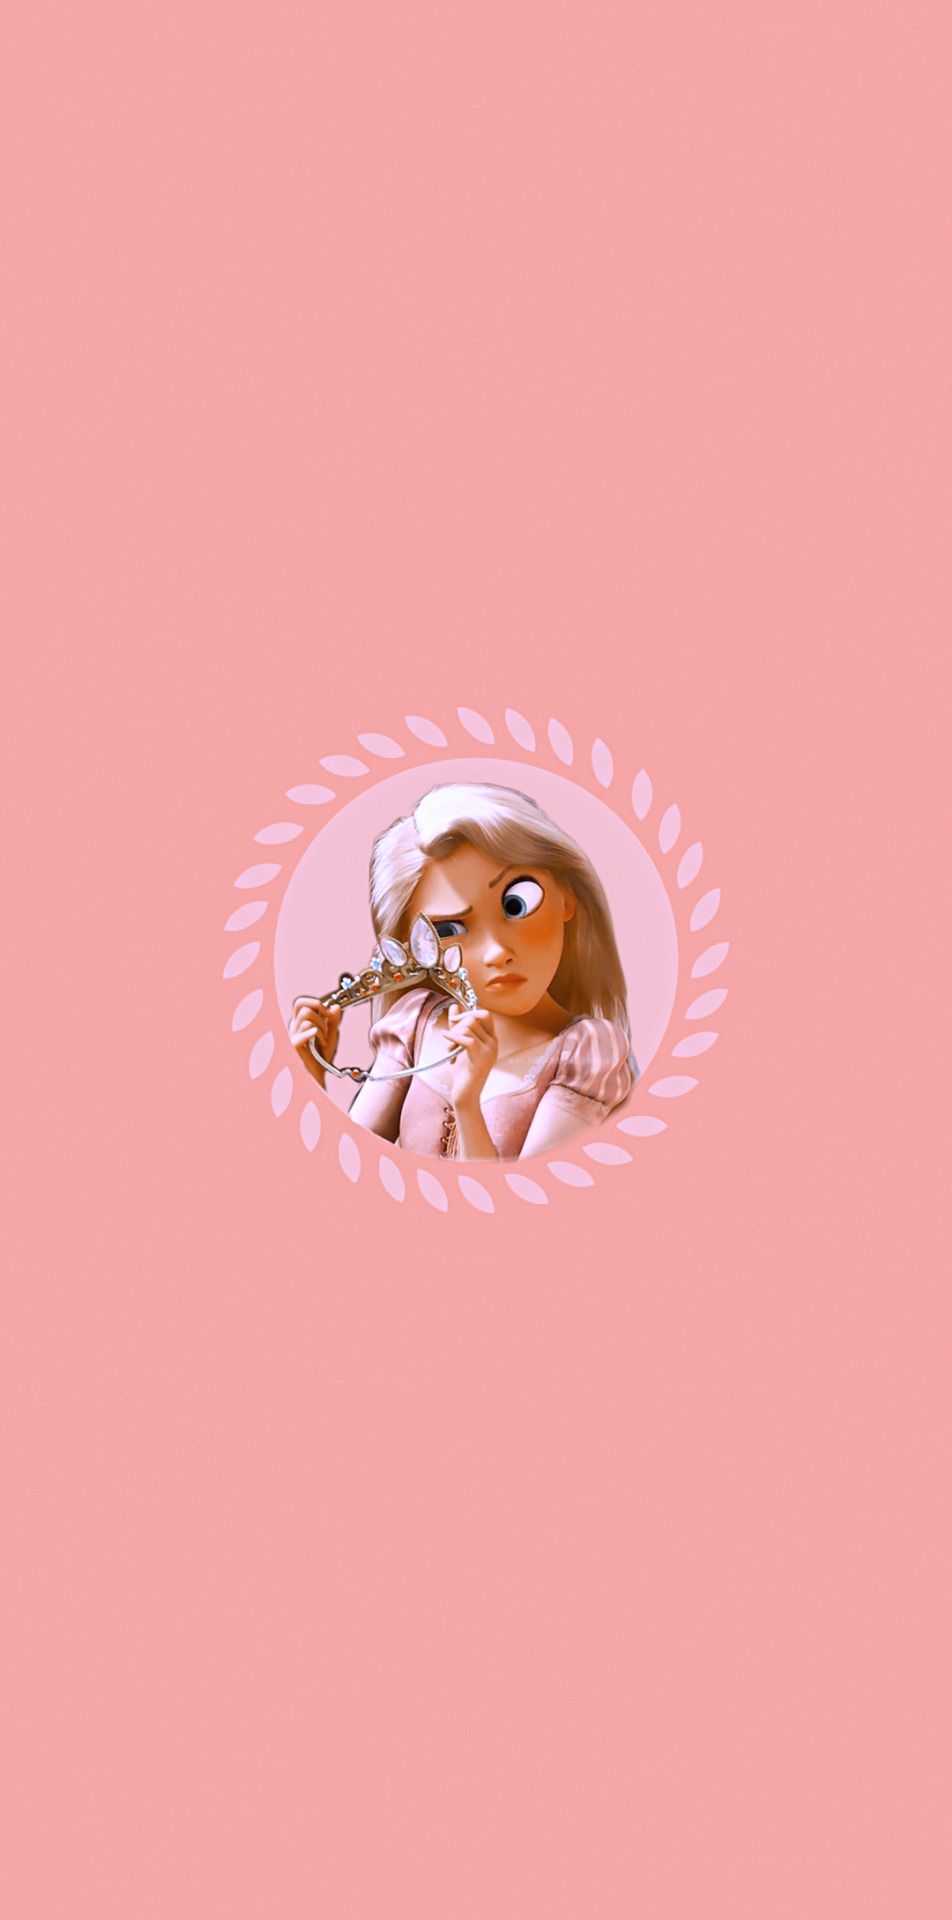 A pink background with an image of the princess - Rapunzel